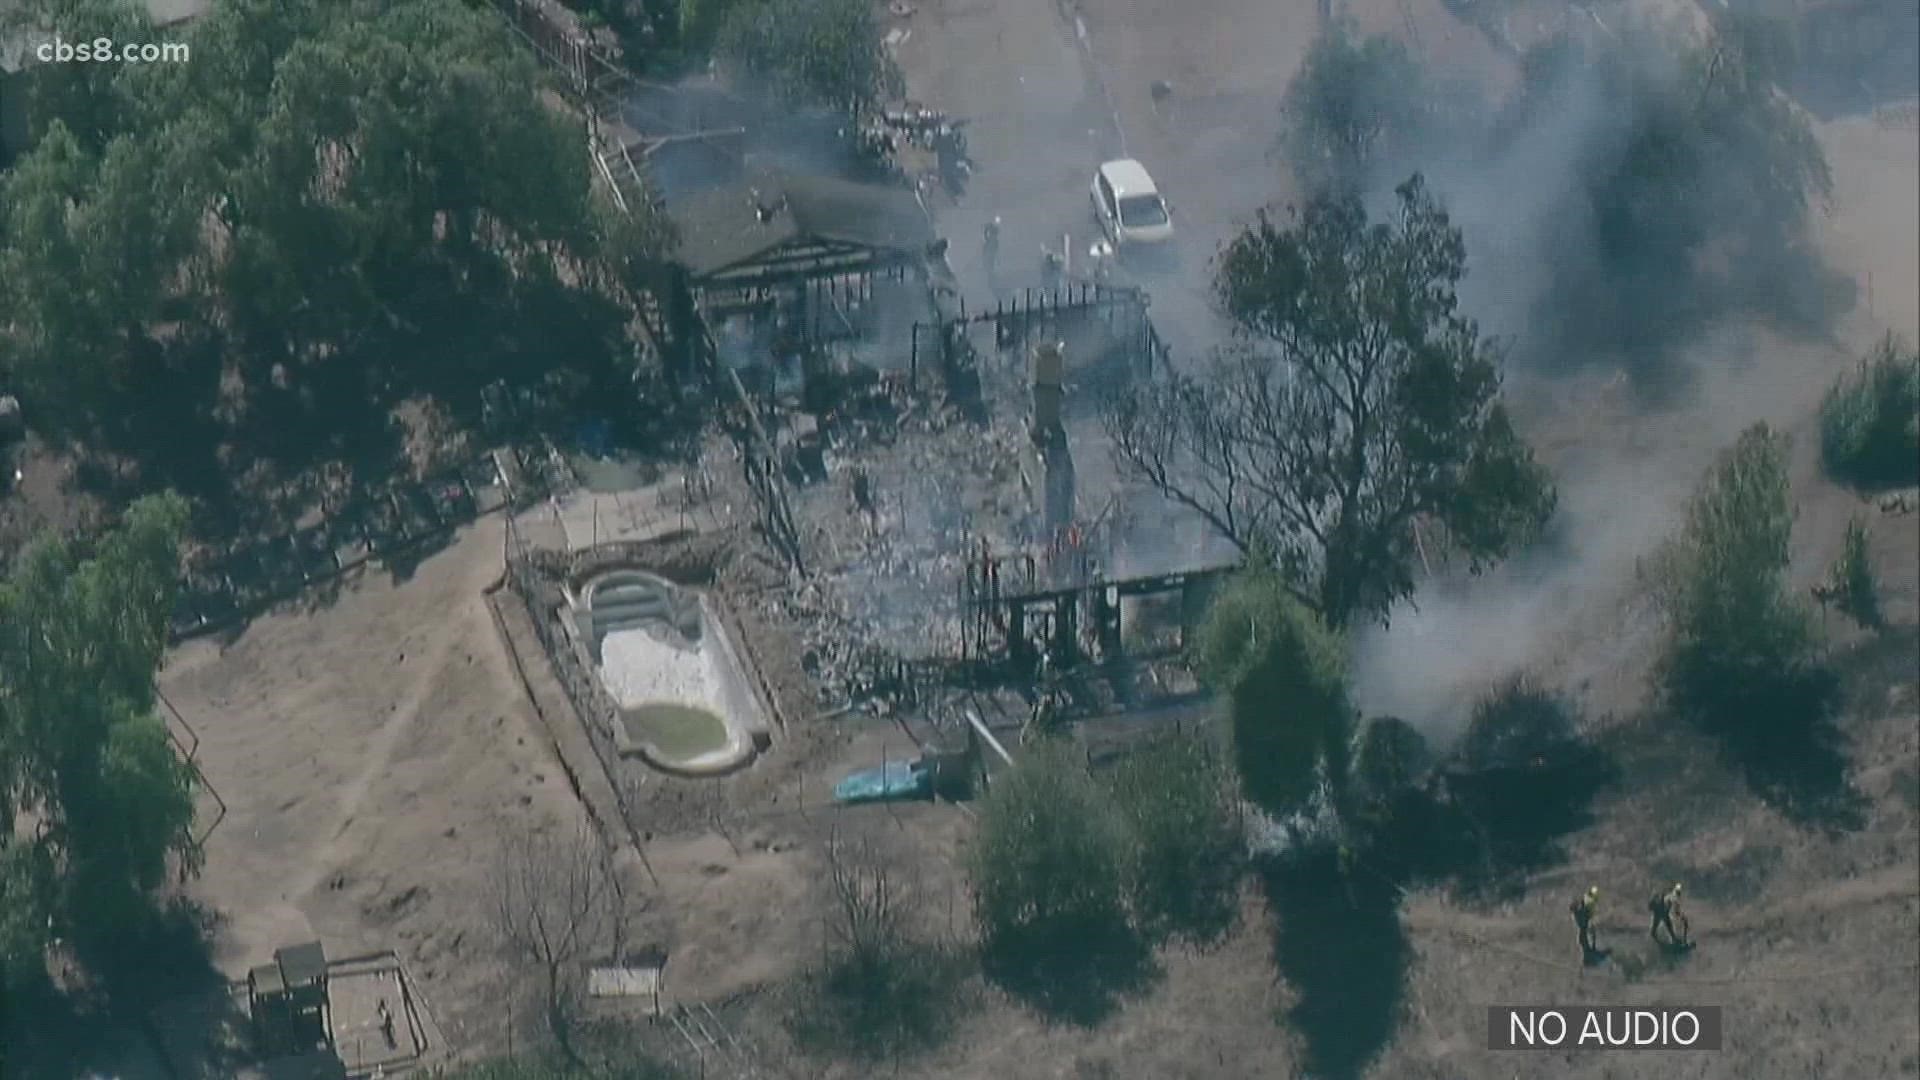 Fire crews extinguished a fire that engulfed a house on Dehesa Road Friday afternoon in eastern San Diego County.